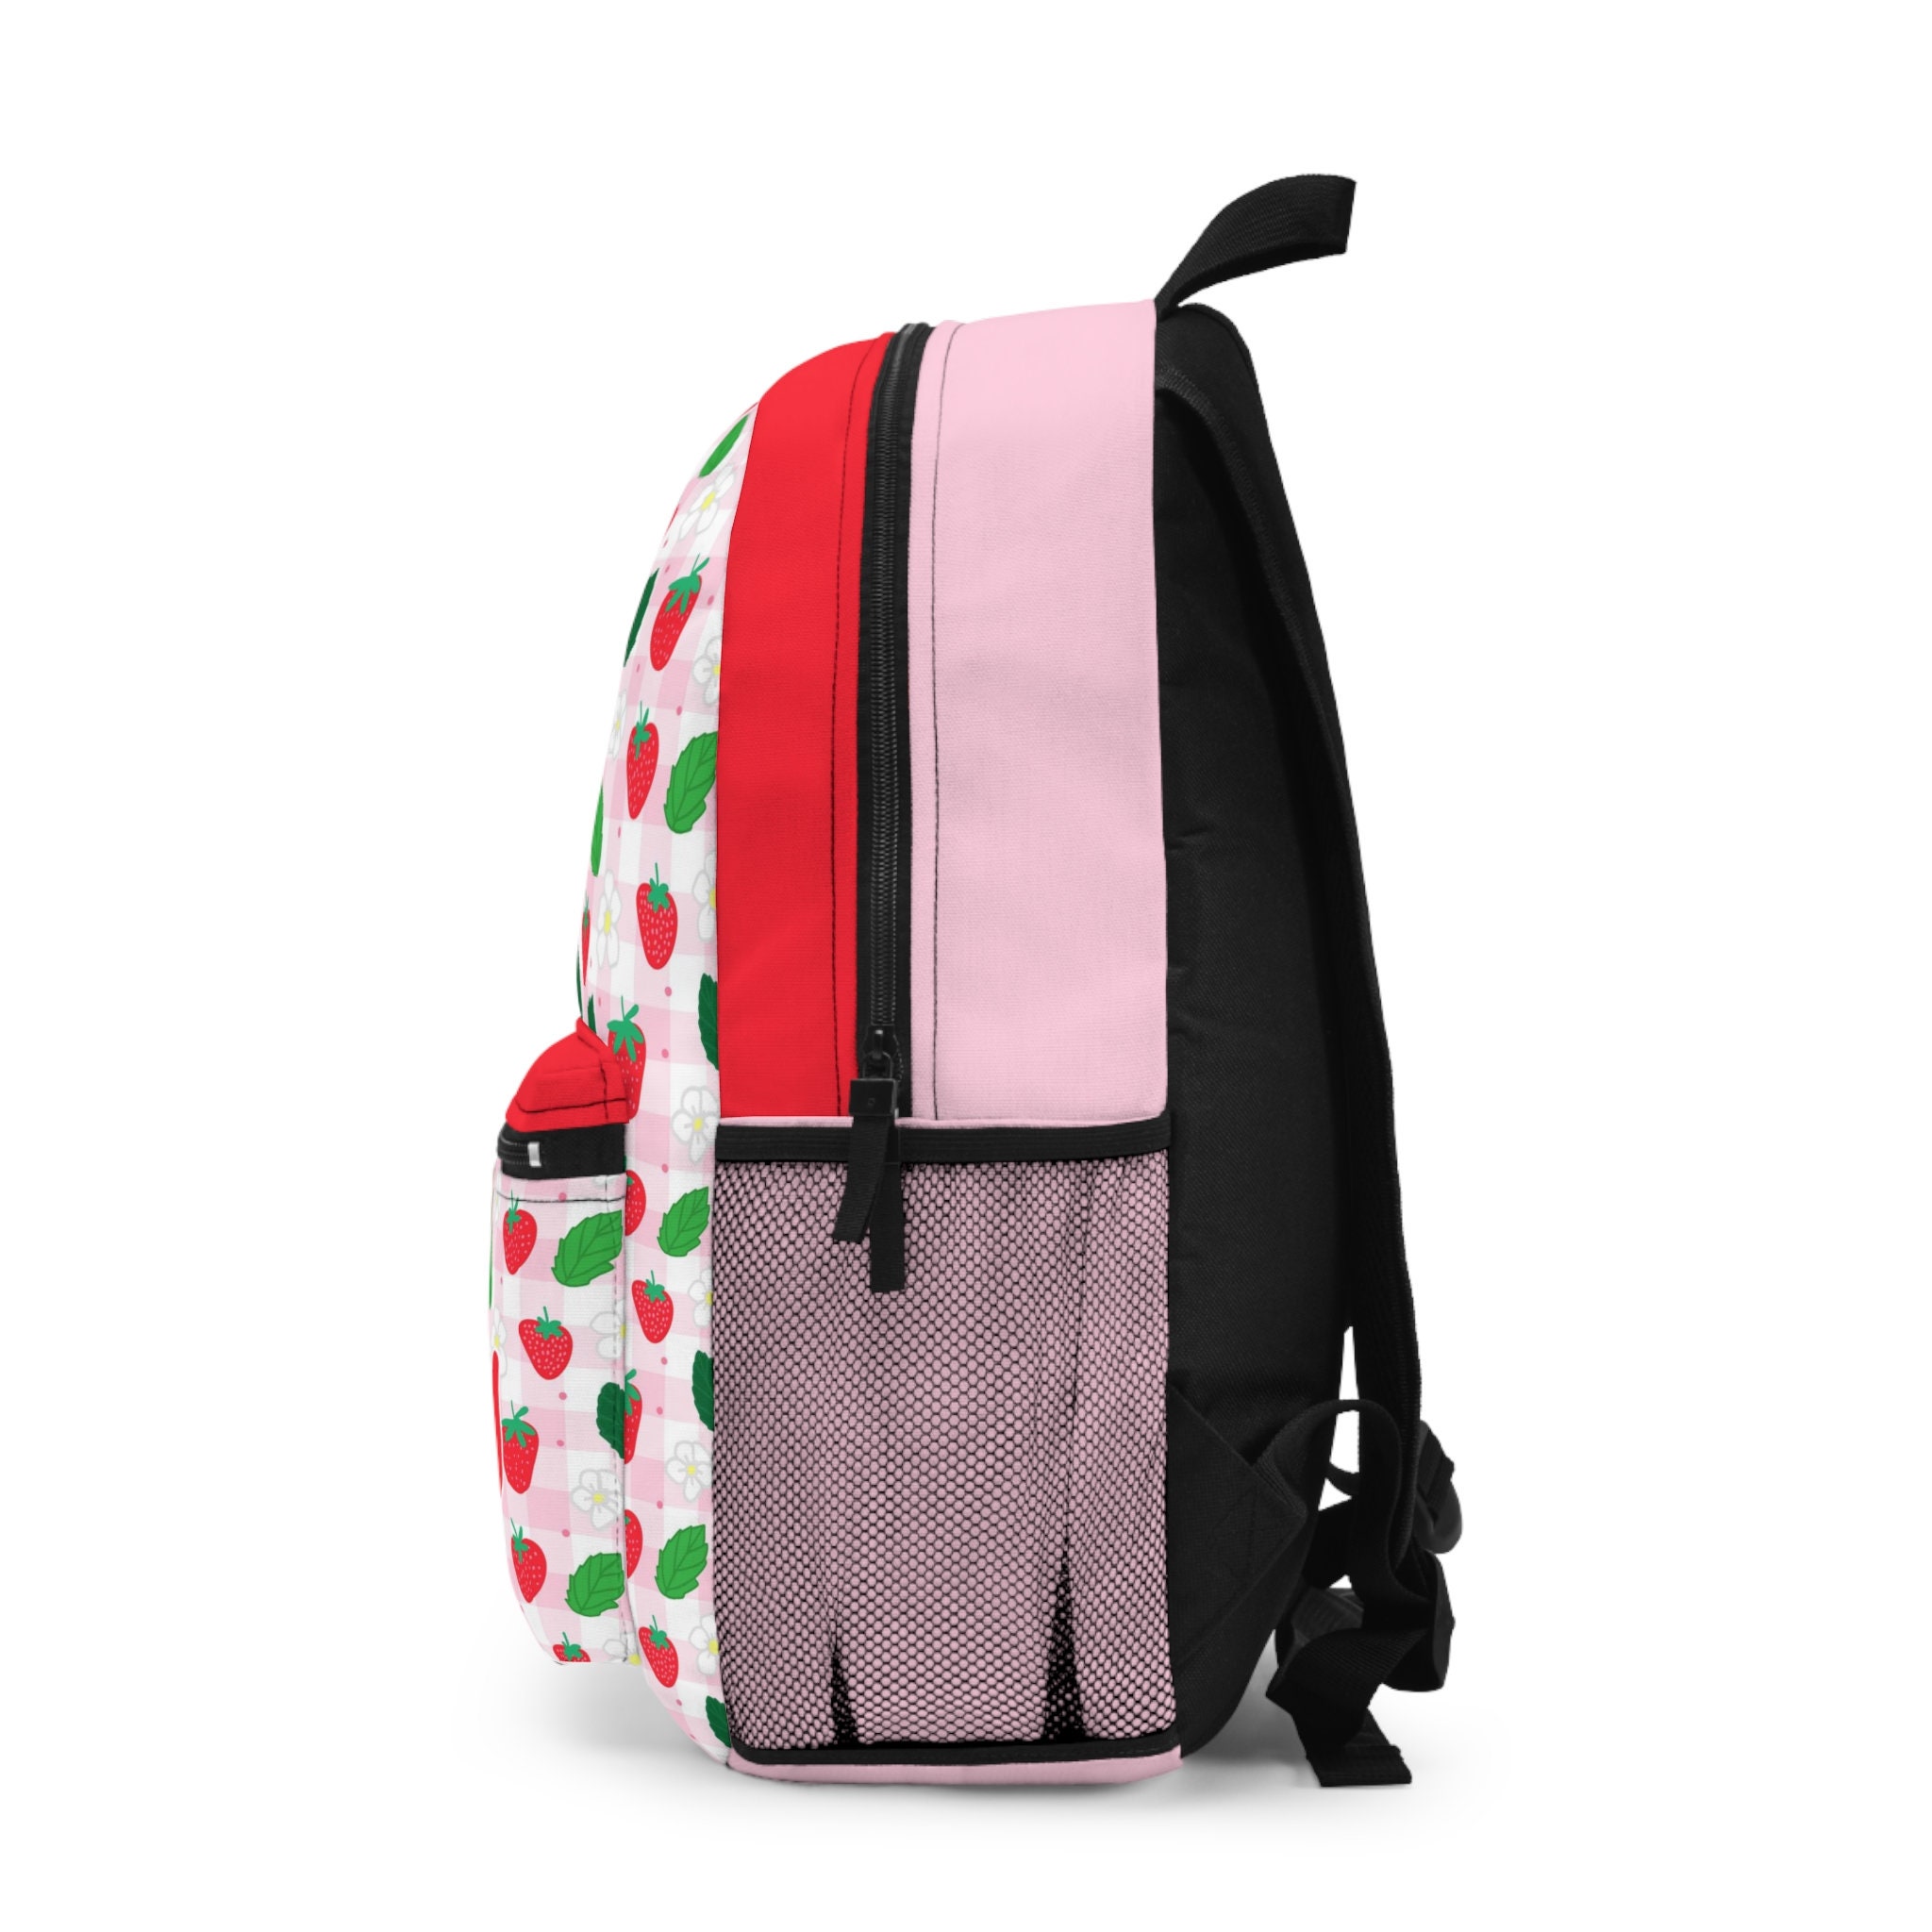 Strawberries Pattern Cute Girly Gift For Kids Personalized Name School Backpack